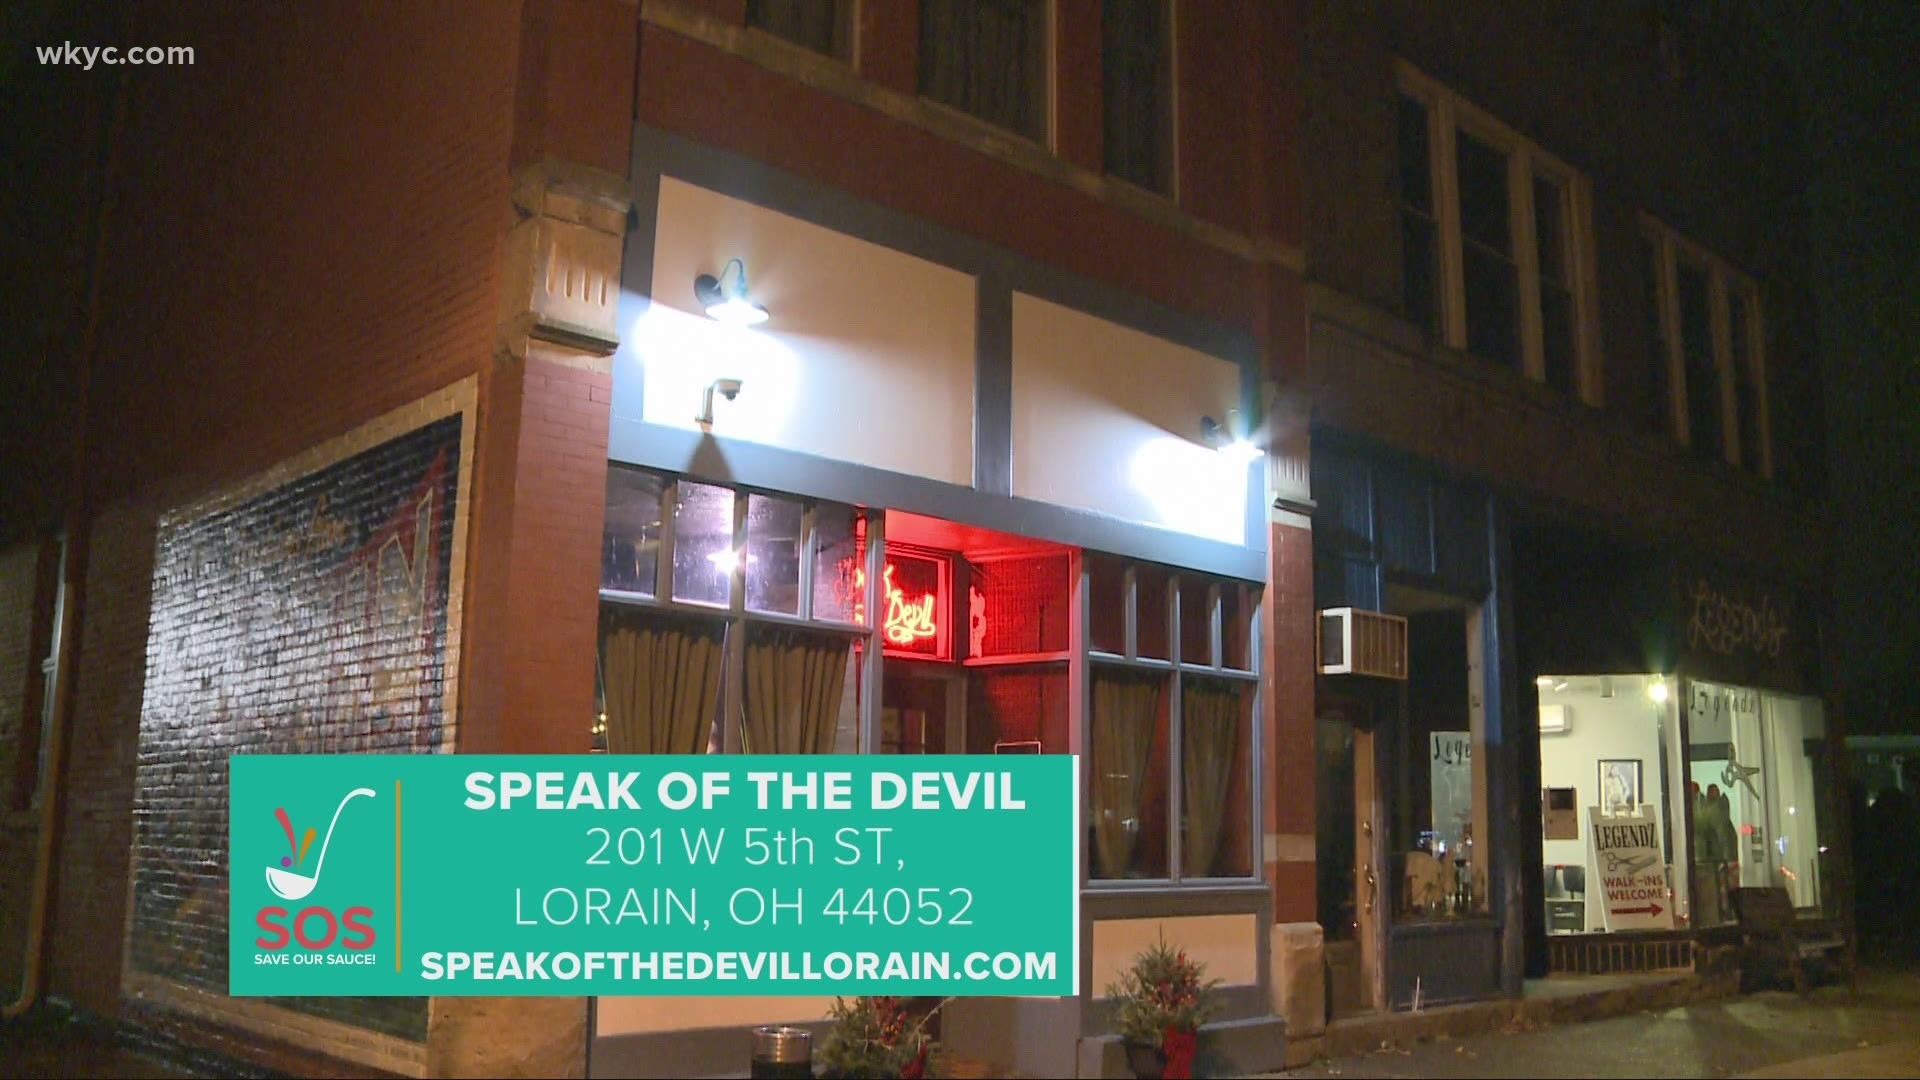 We're highlighting Speak of the Devil cocktail lounge in today's edition of 'Save Our Sauce.'